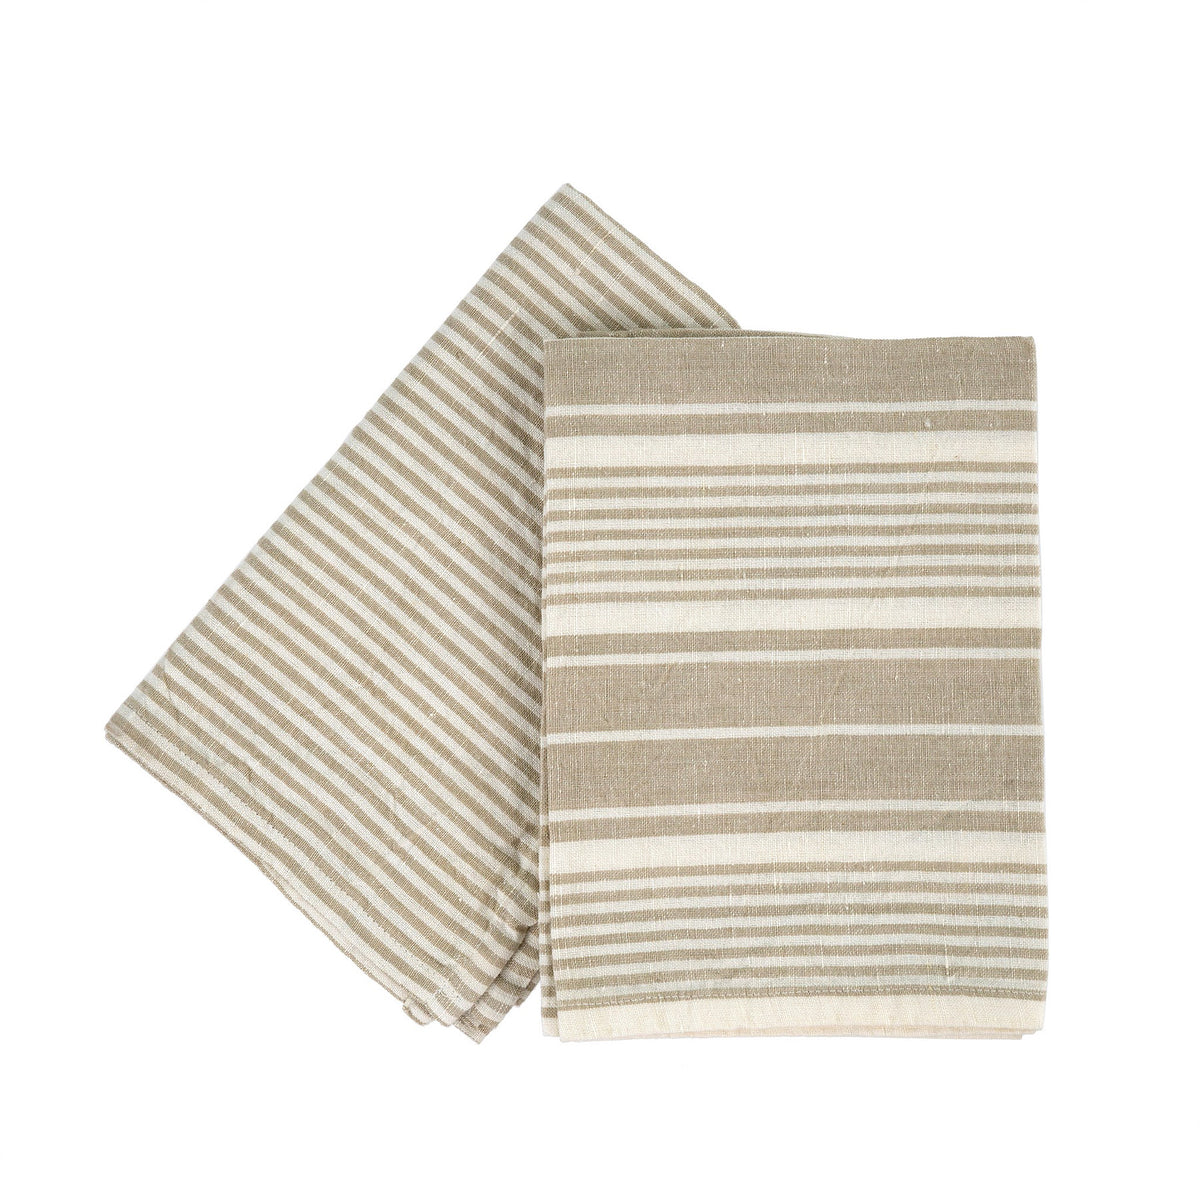 French Stripe Linen Tea Towel, Taupe, Set of 2